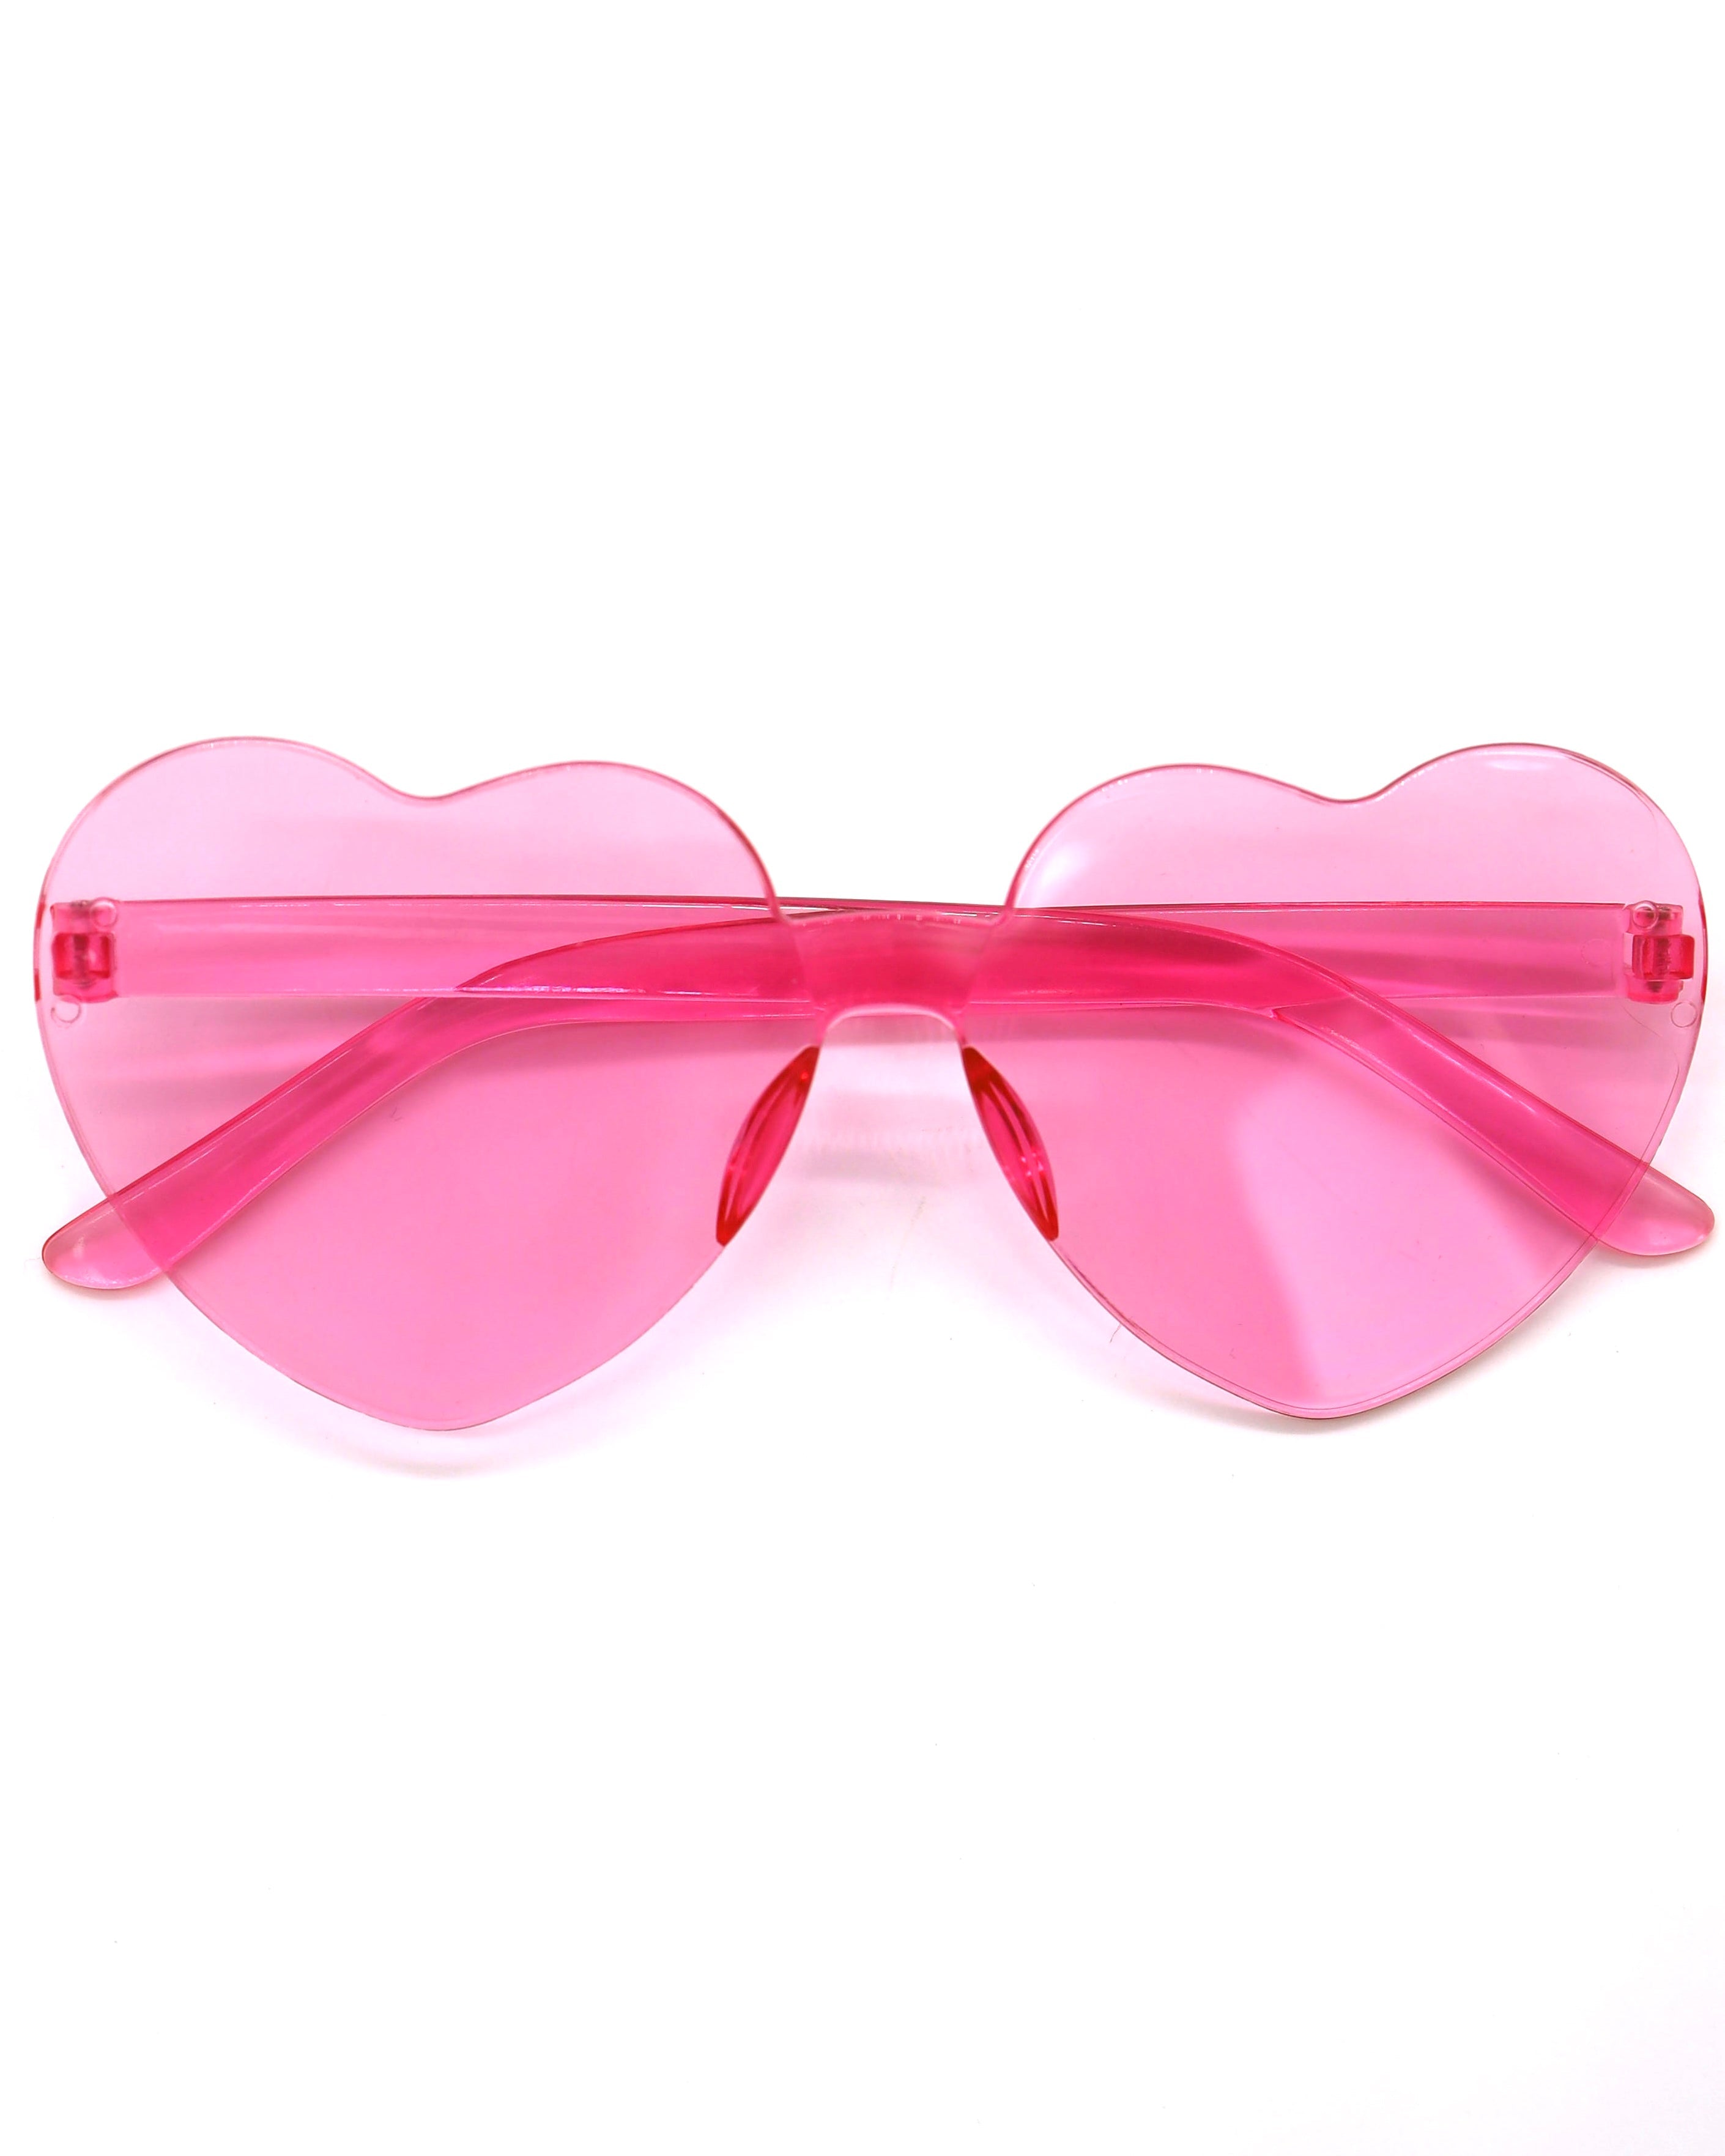 Pink Heart Sunglasses, Heart Sunglasses, - One Stop Rave